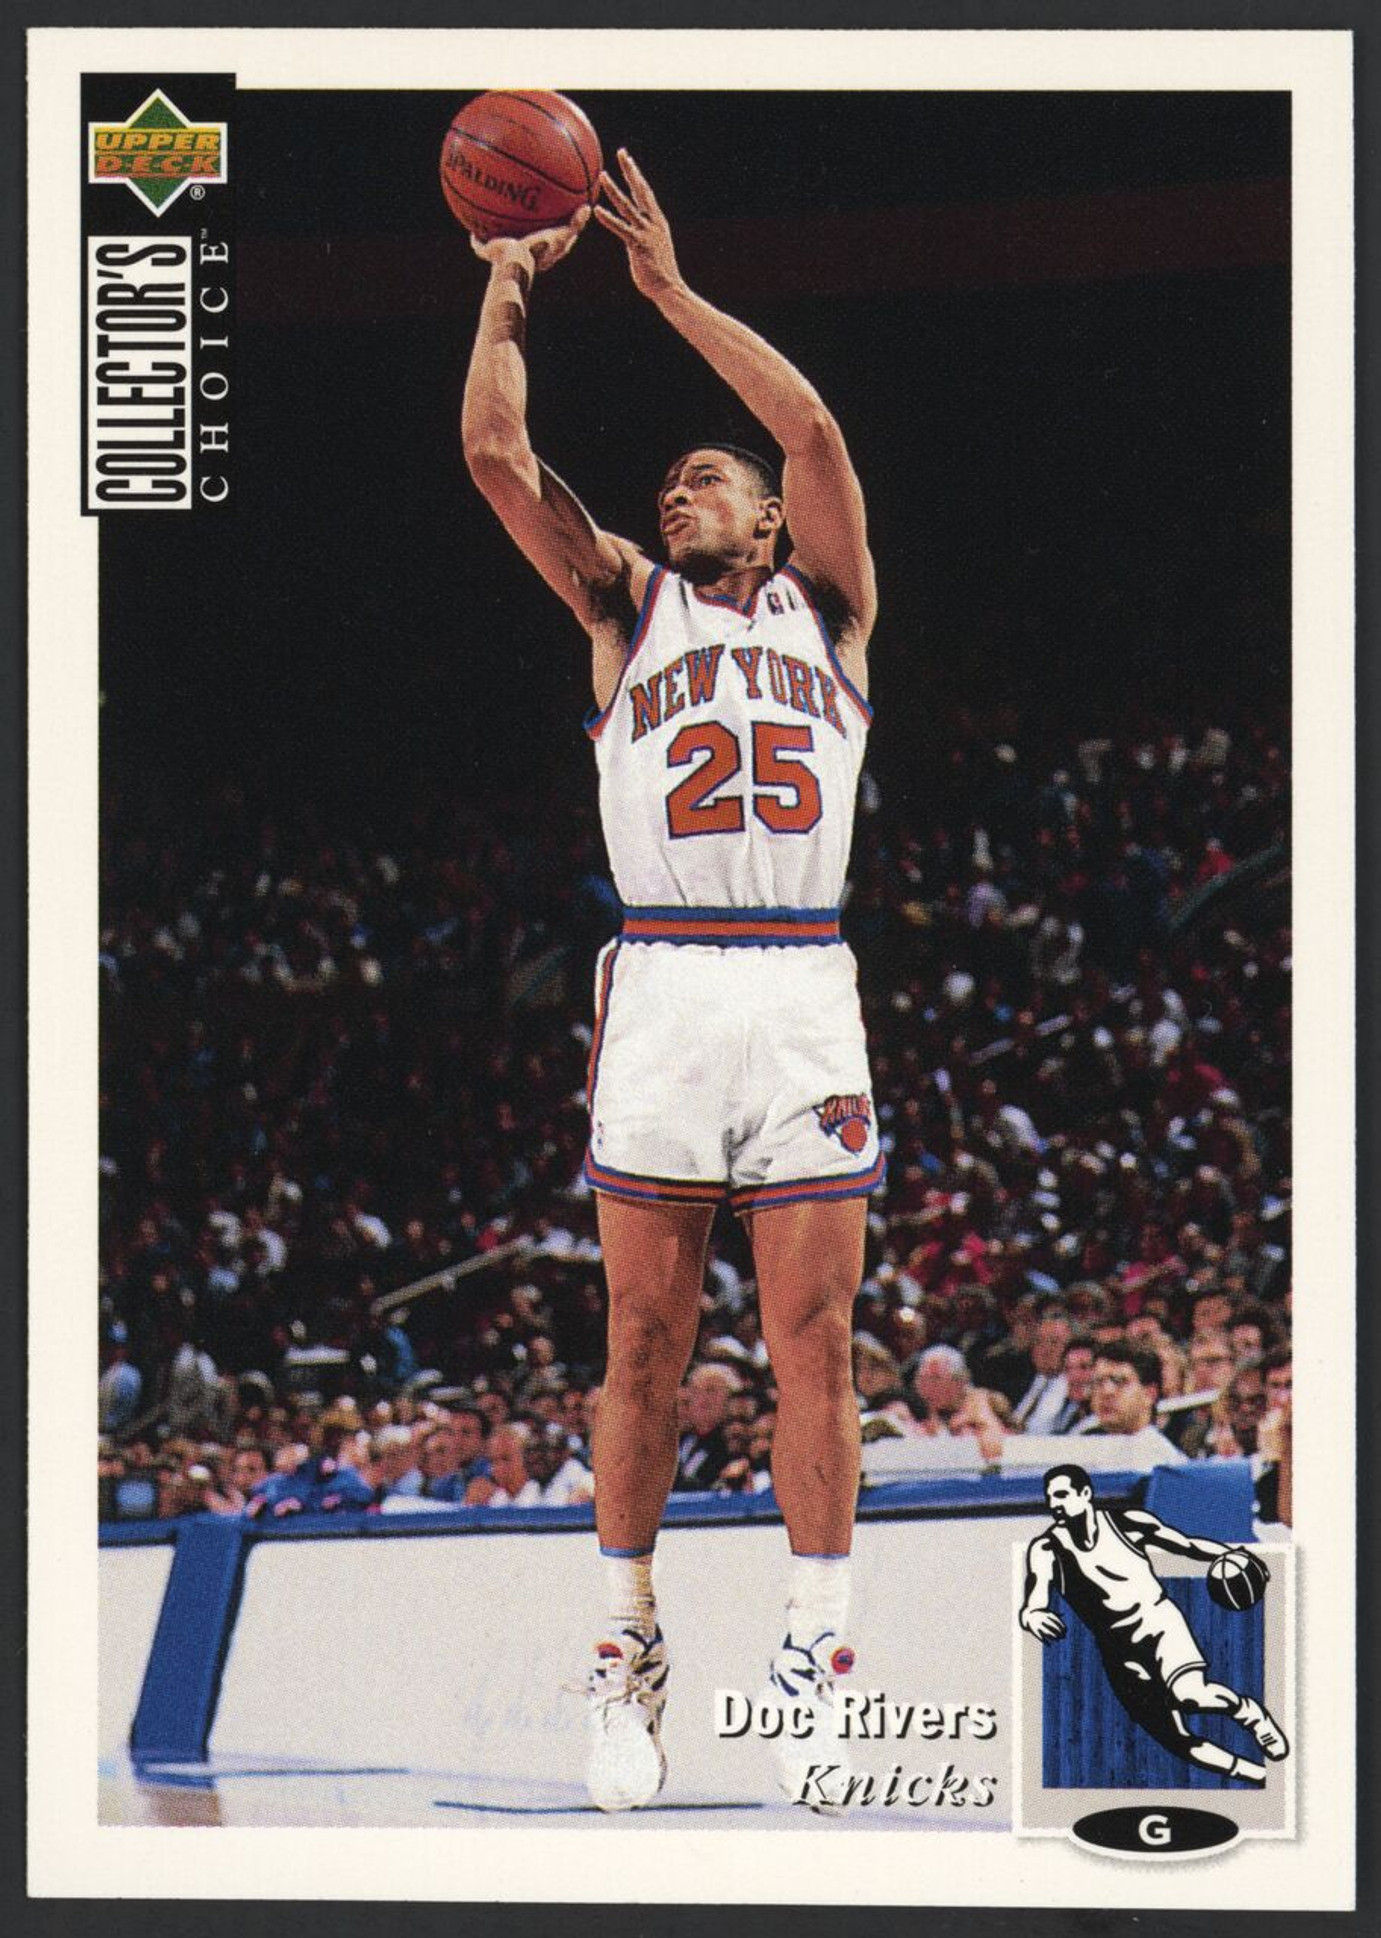 1994-95 Upper Deck Collector's Choice #290 Doc Rivers Knicks EX